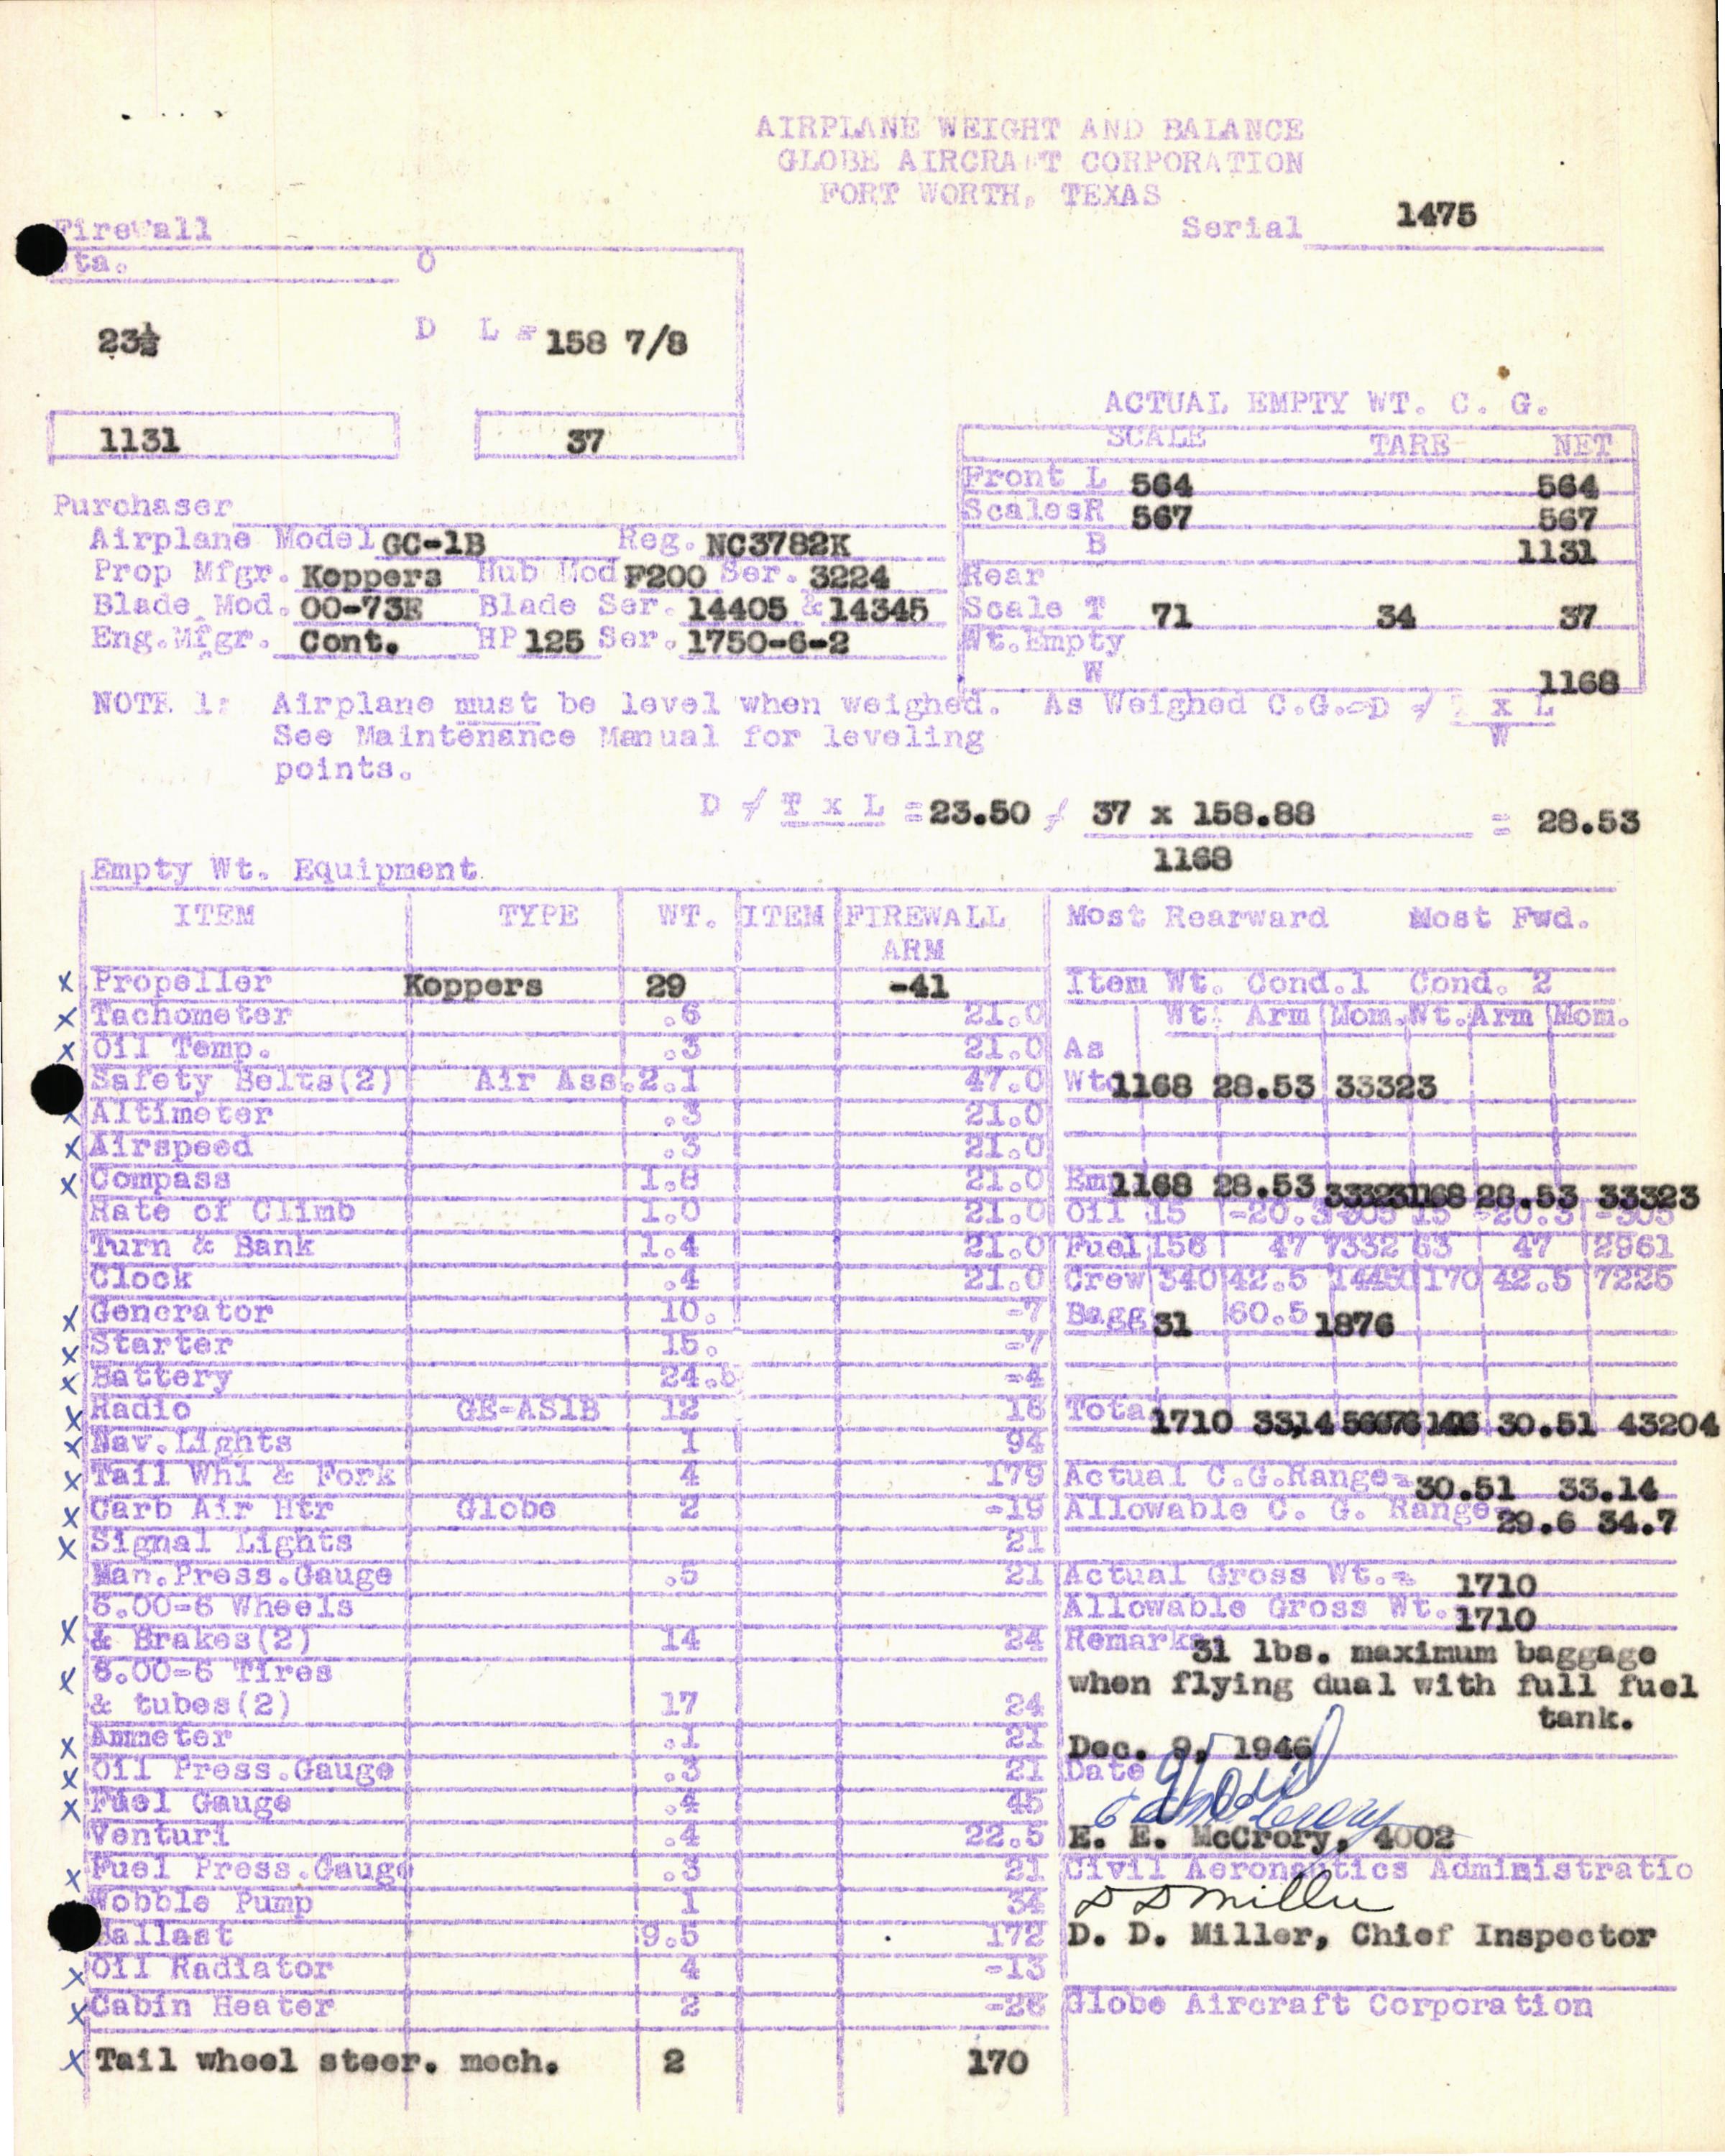 Sample page 7 from AirCorps Library document: Technical Information for Serial Number 1475